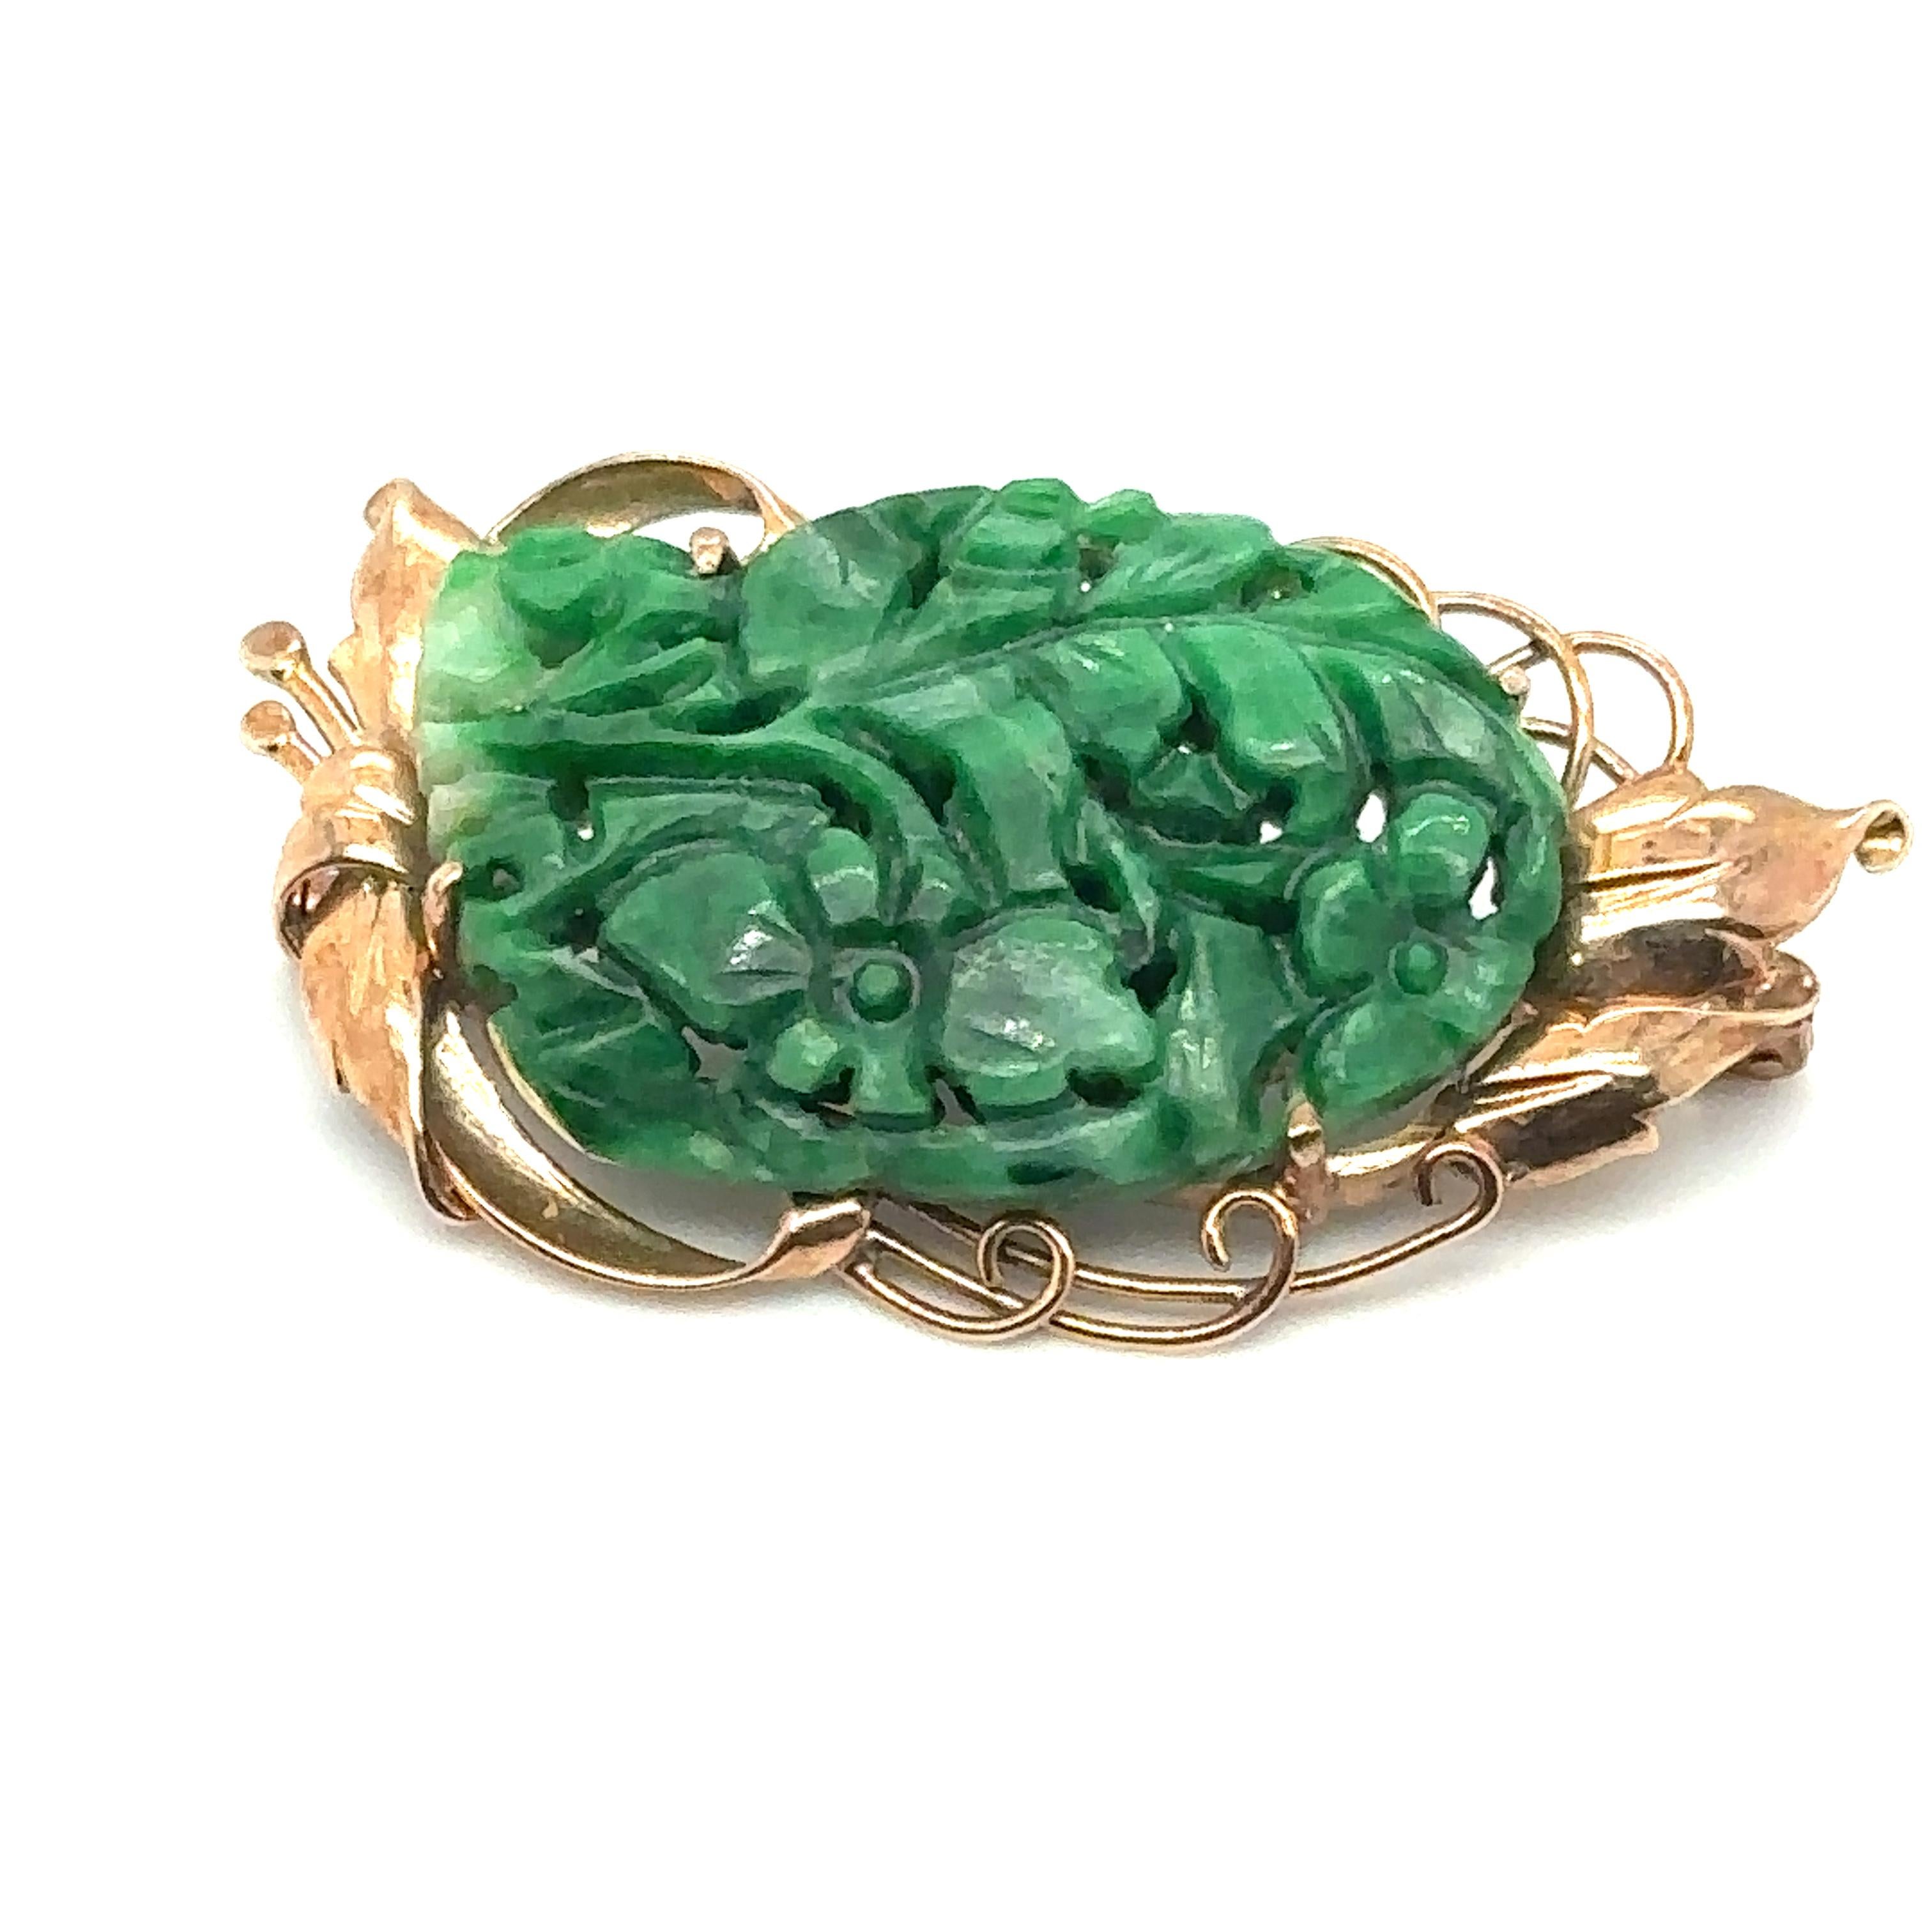 Rough Cut 1890s Victorian Carved Green Jade Brooch with Leaf Design in 14 Karat Gold For Sale